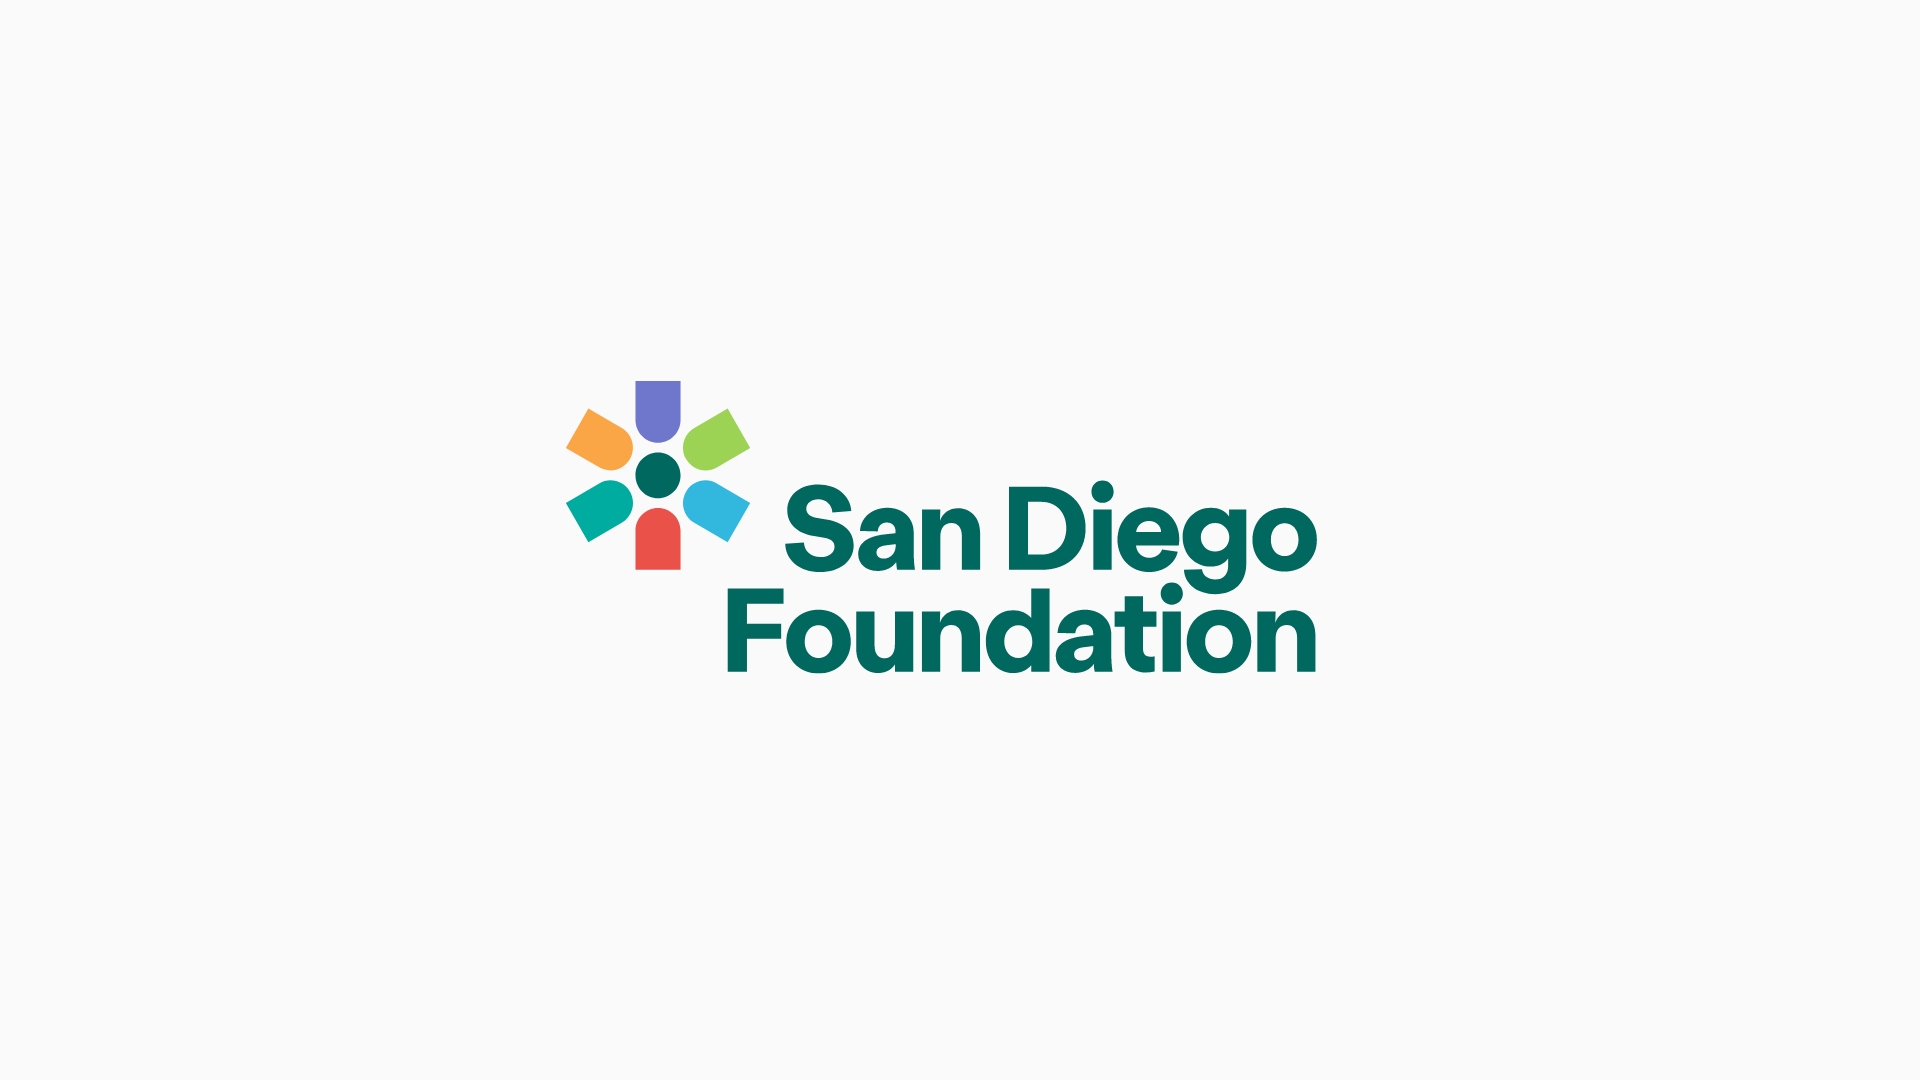 MiresBall Creates Branding for San Diego Foundation – More Inclusive